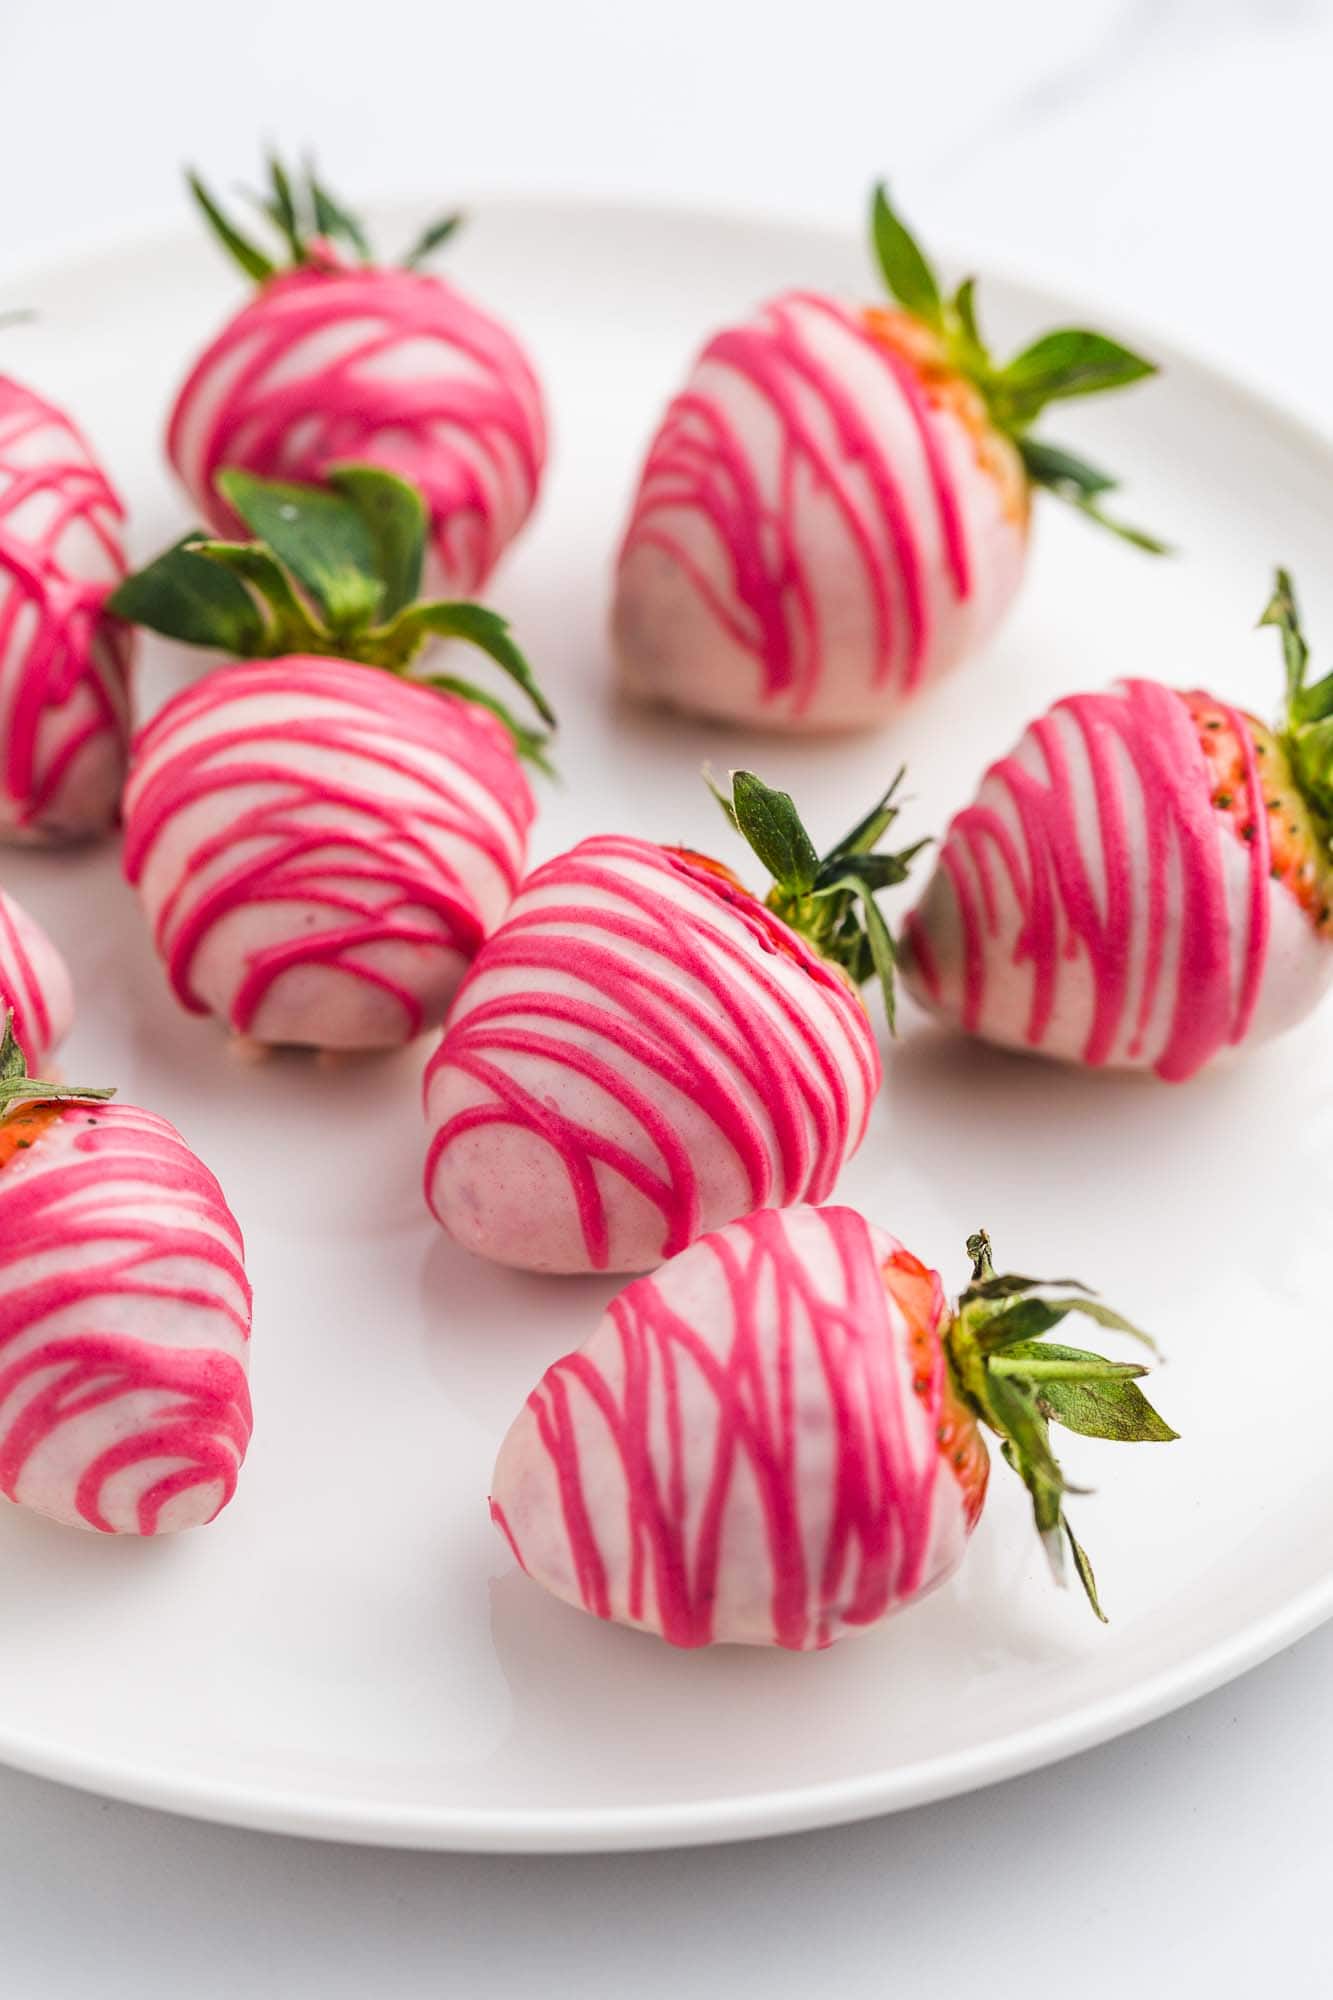 Pink chocolate covered strawberries with hot pink drizzle, on a white plate.